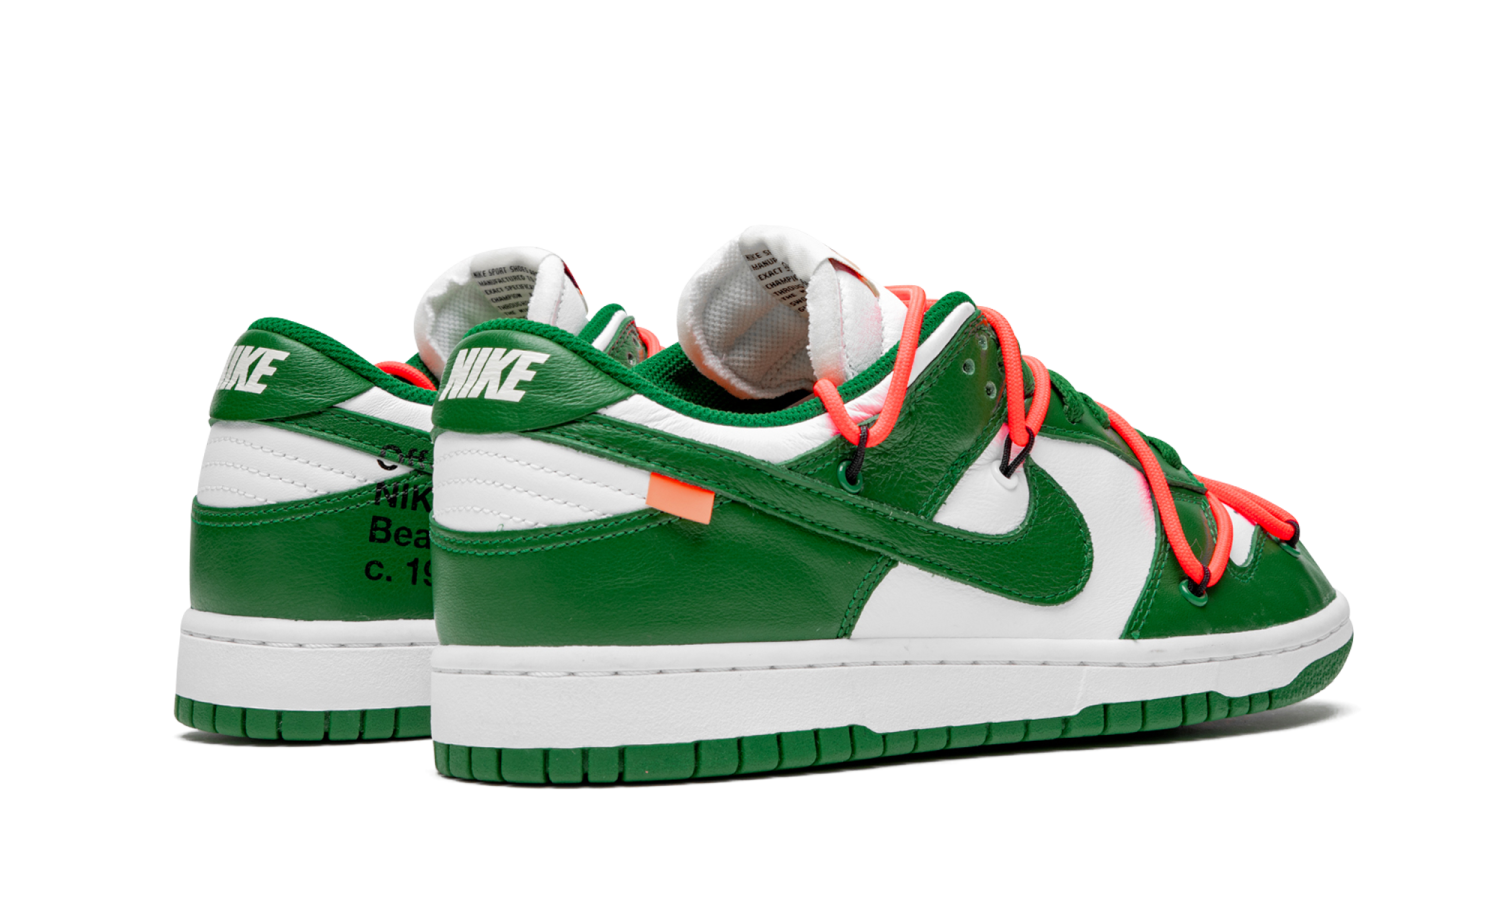 фото Dunk Low “Off-White - Pine Green” (Nike Dunk Low)-CT0856 100